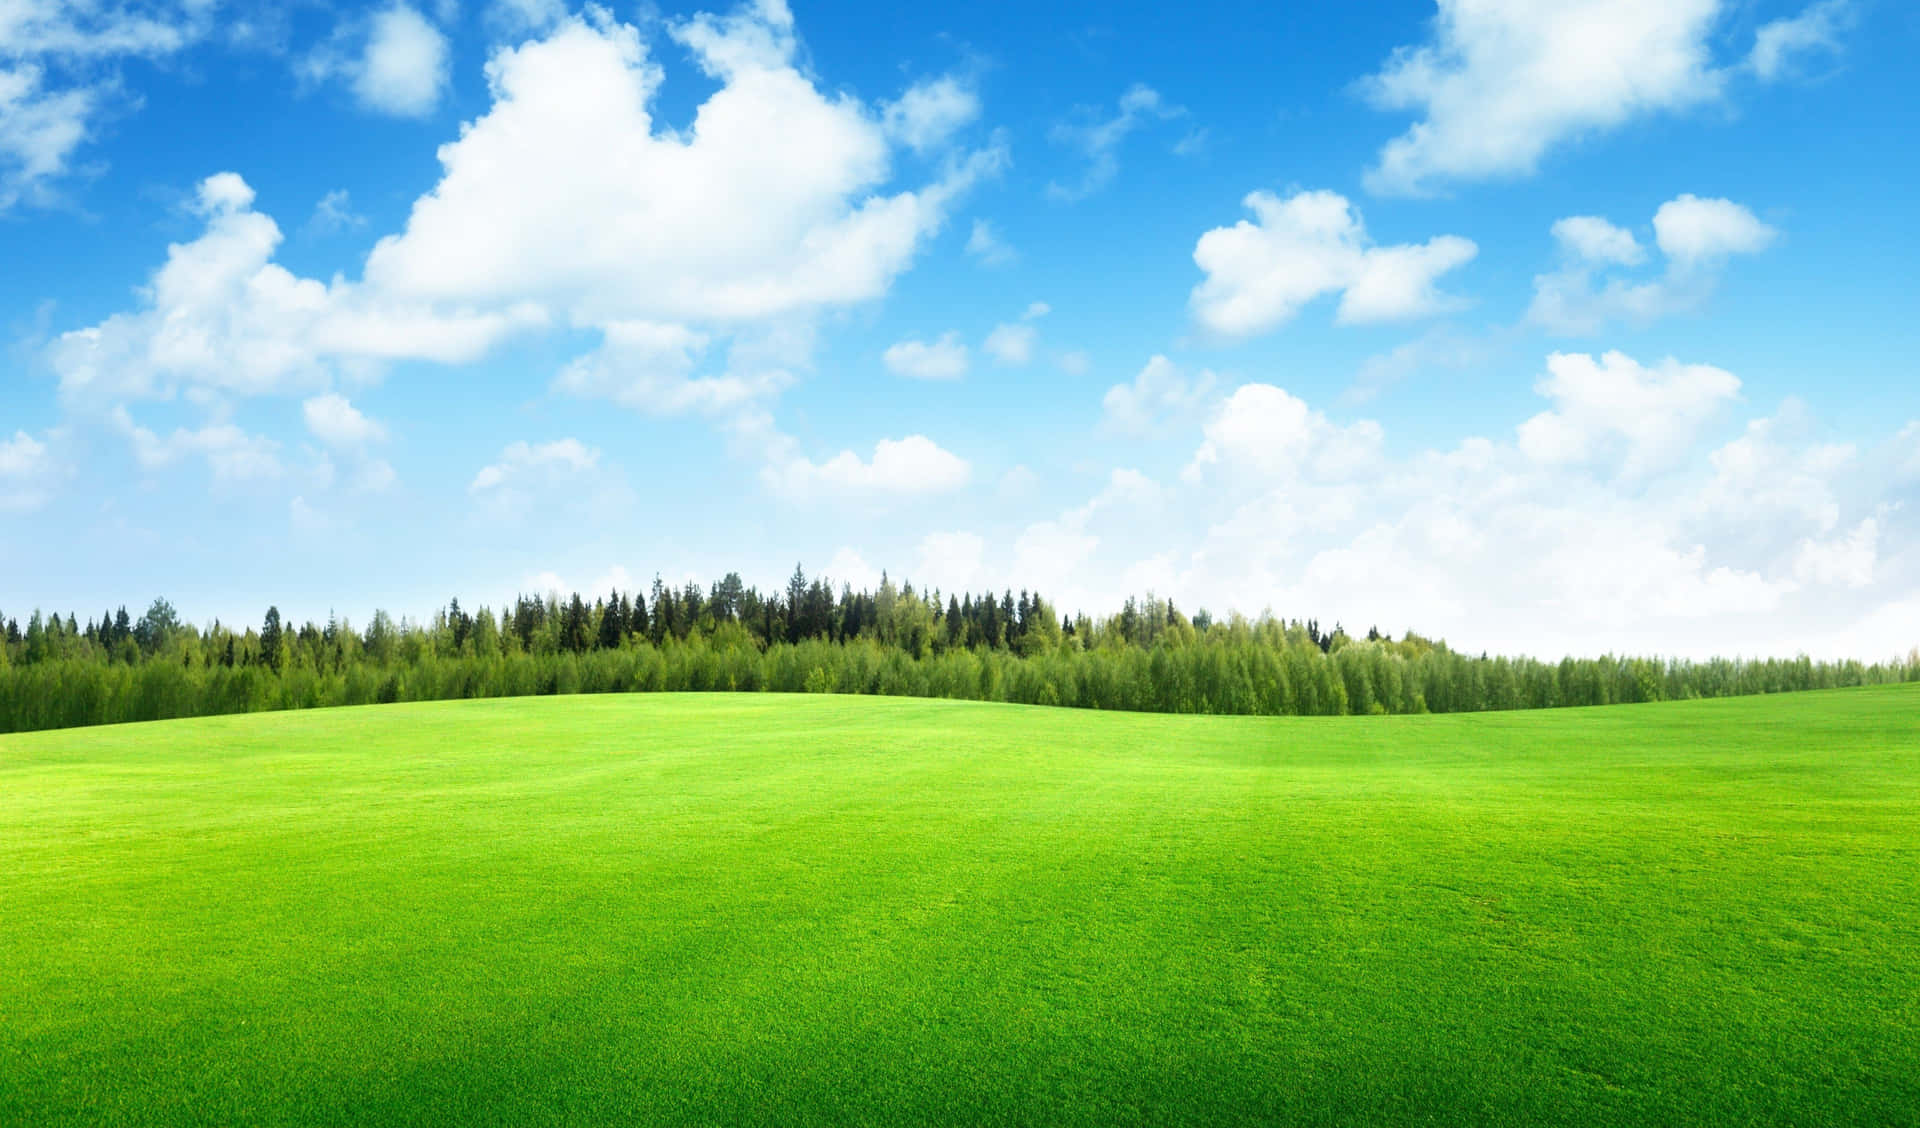 An idyllic view of a meadow, with lush green grass